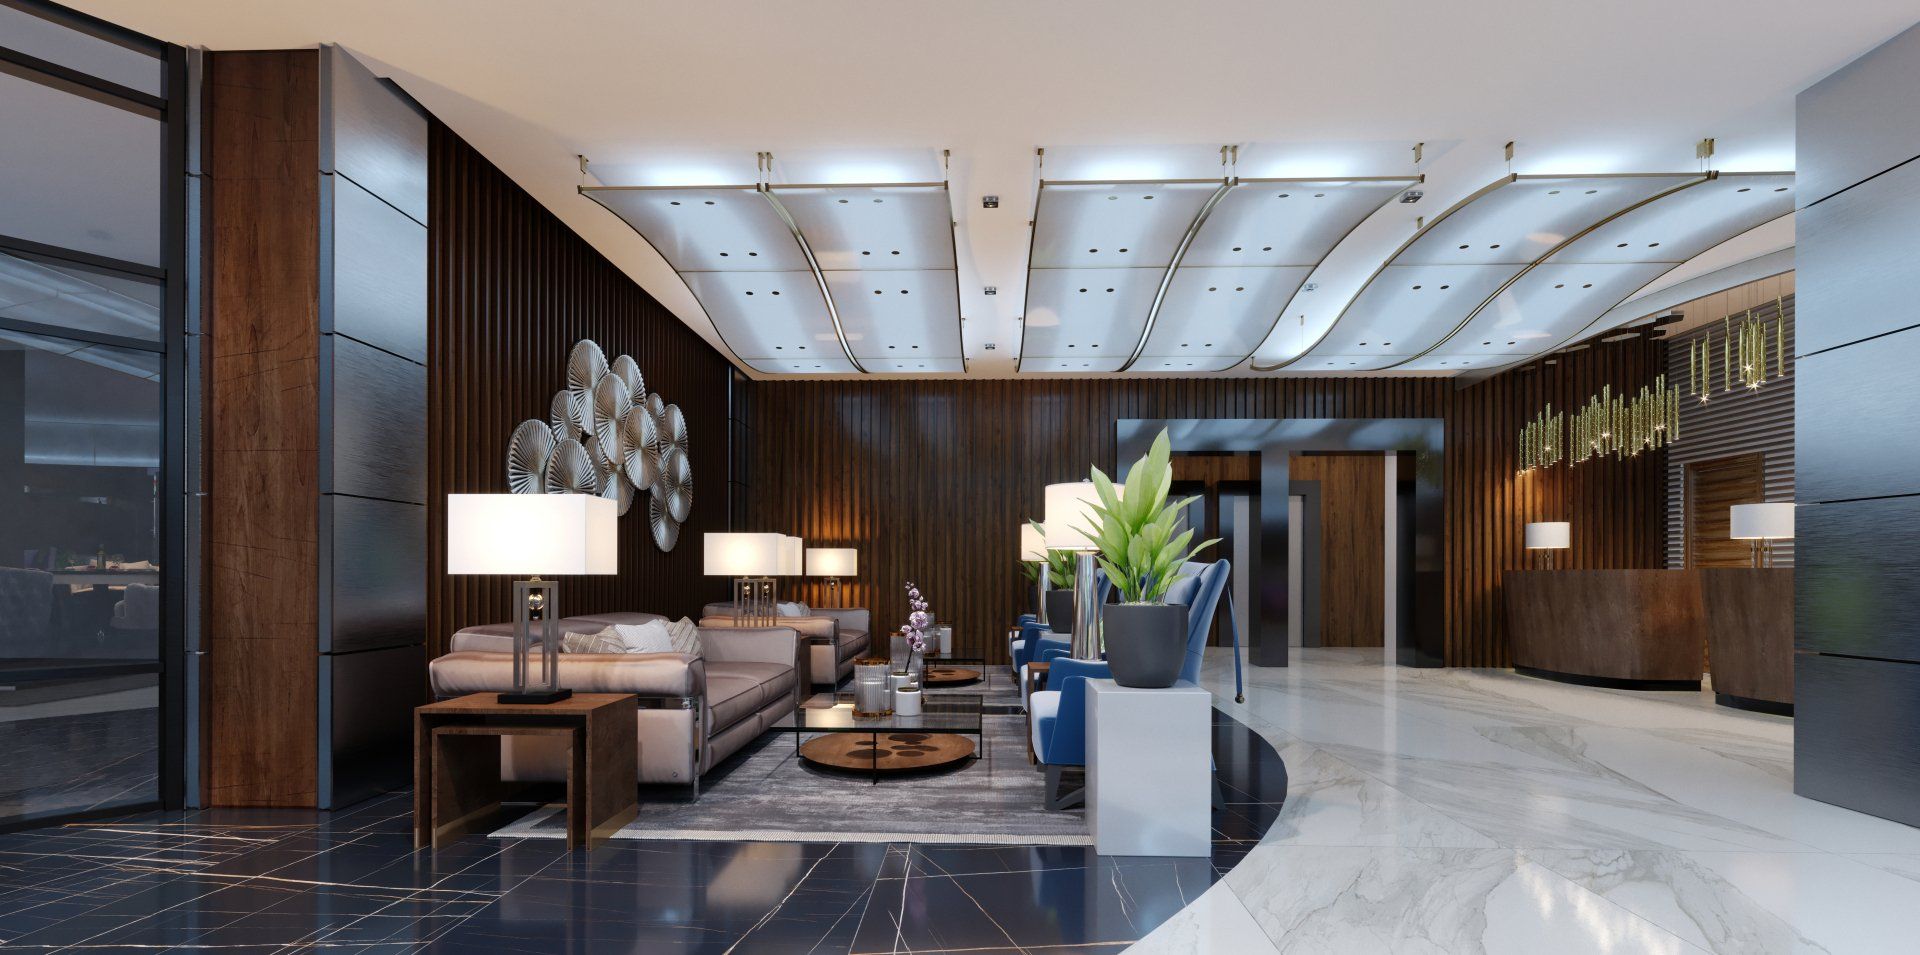 an artist 's impression of the lobby of a hotel